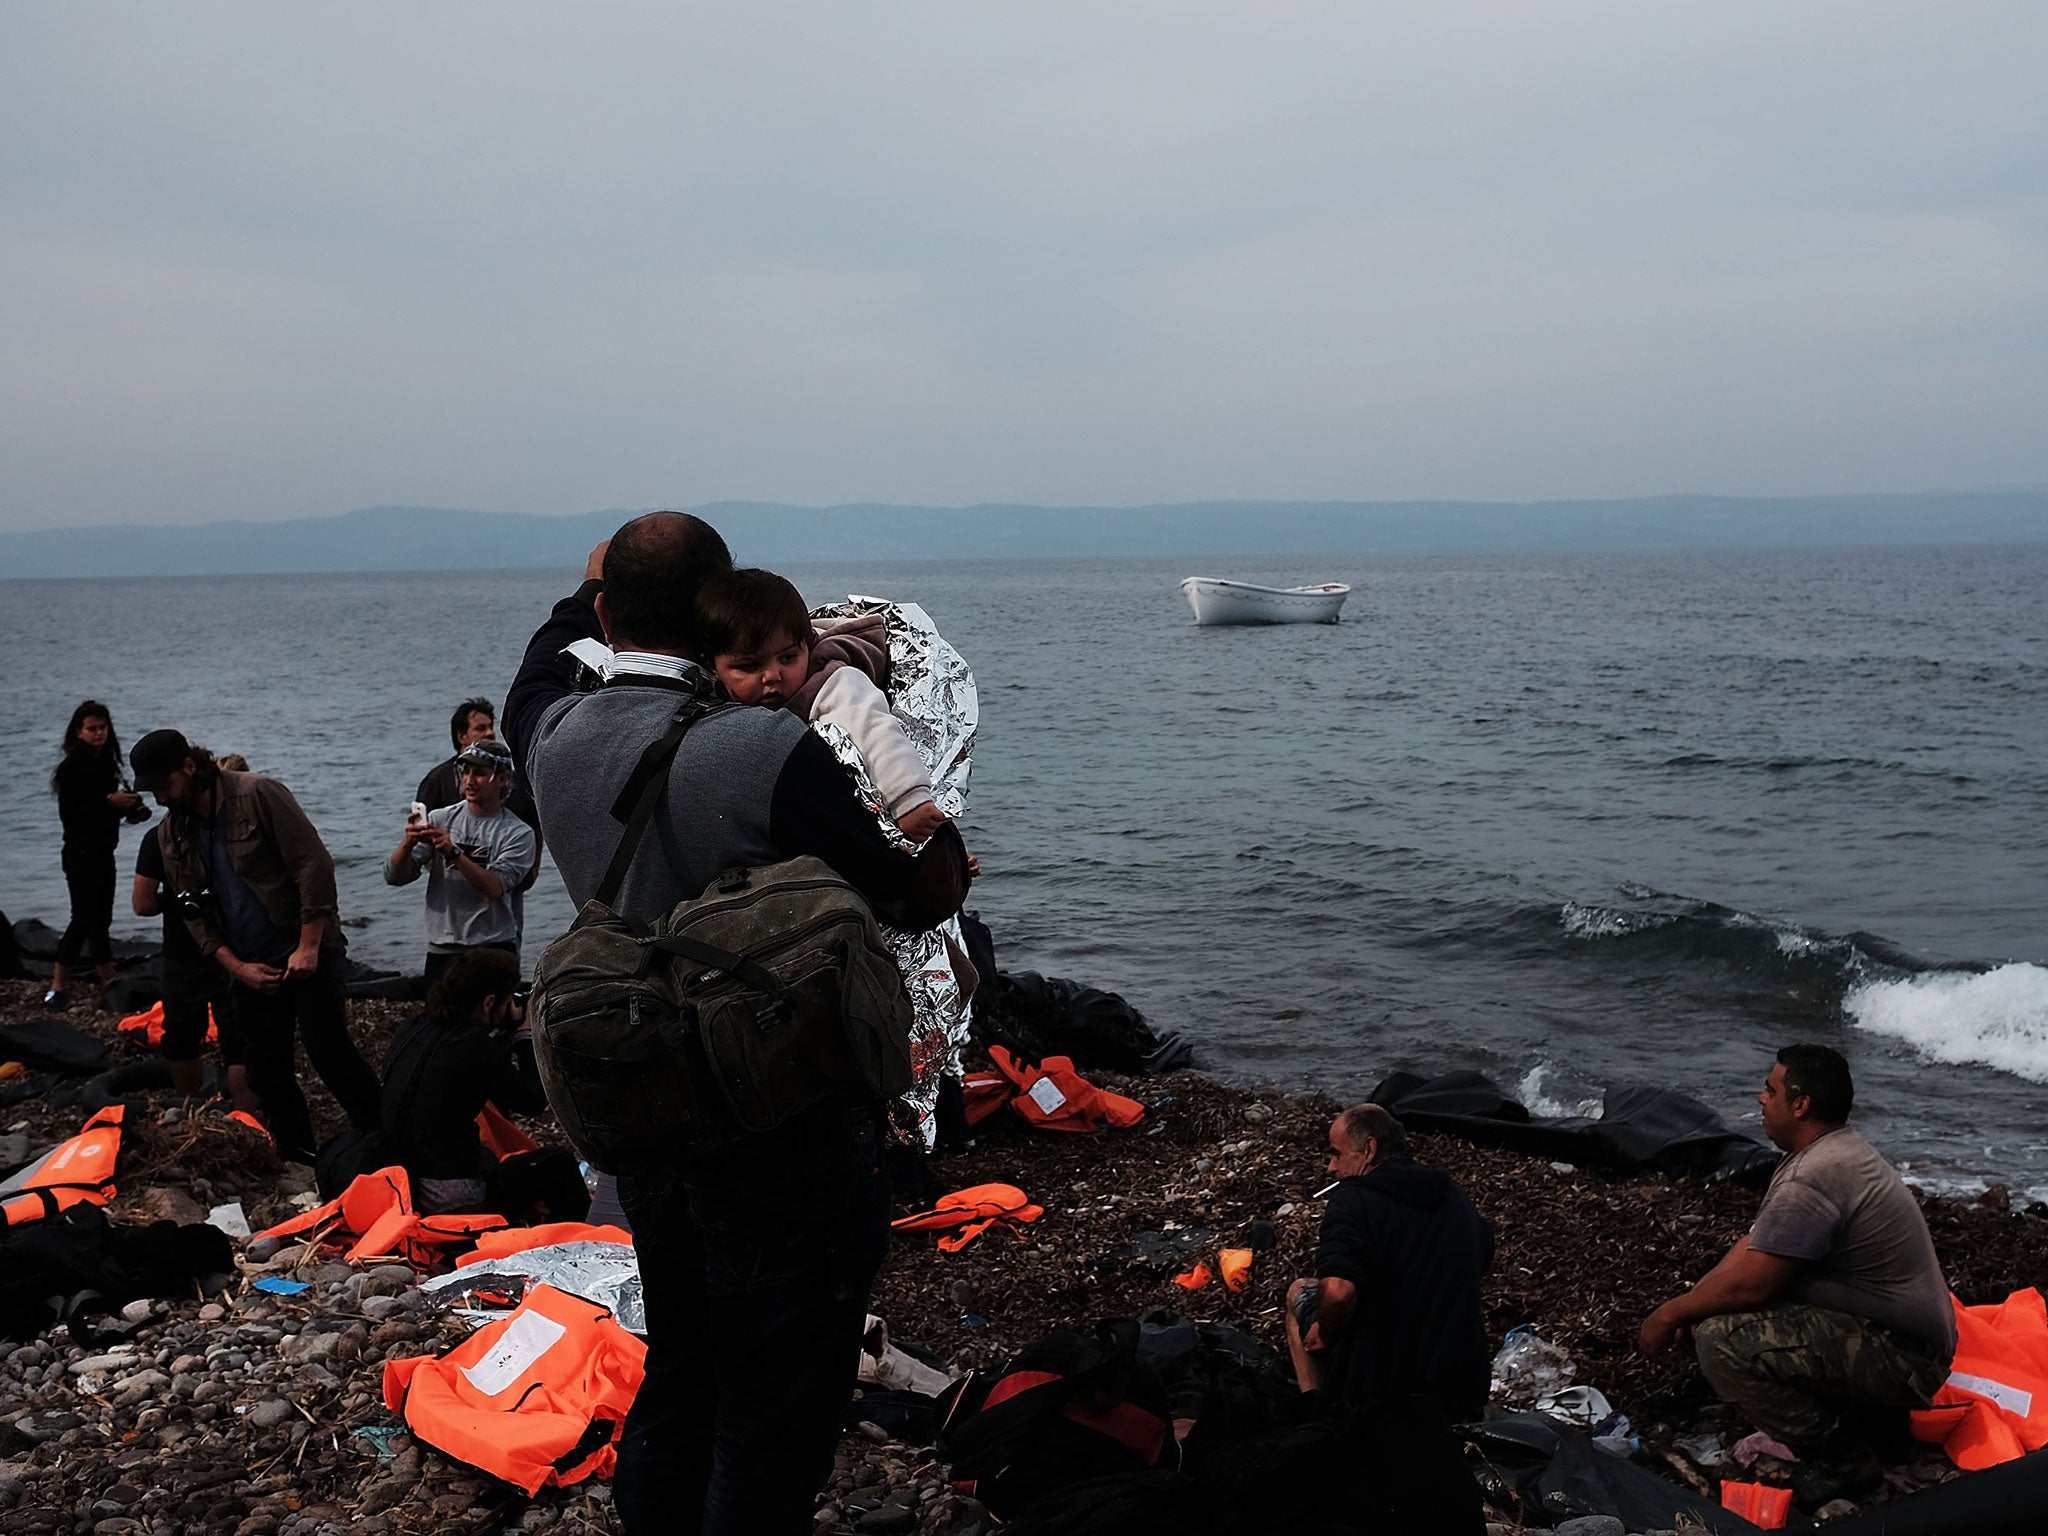 &#13;
The weather is worsening but thousands of people continue to attempt voyages to the Greek islands (AFP/Getty)&#13;